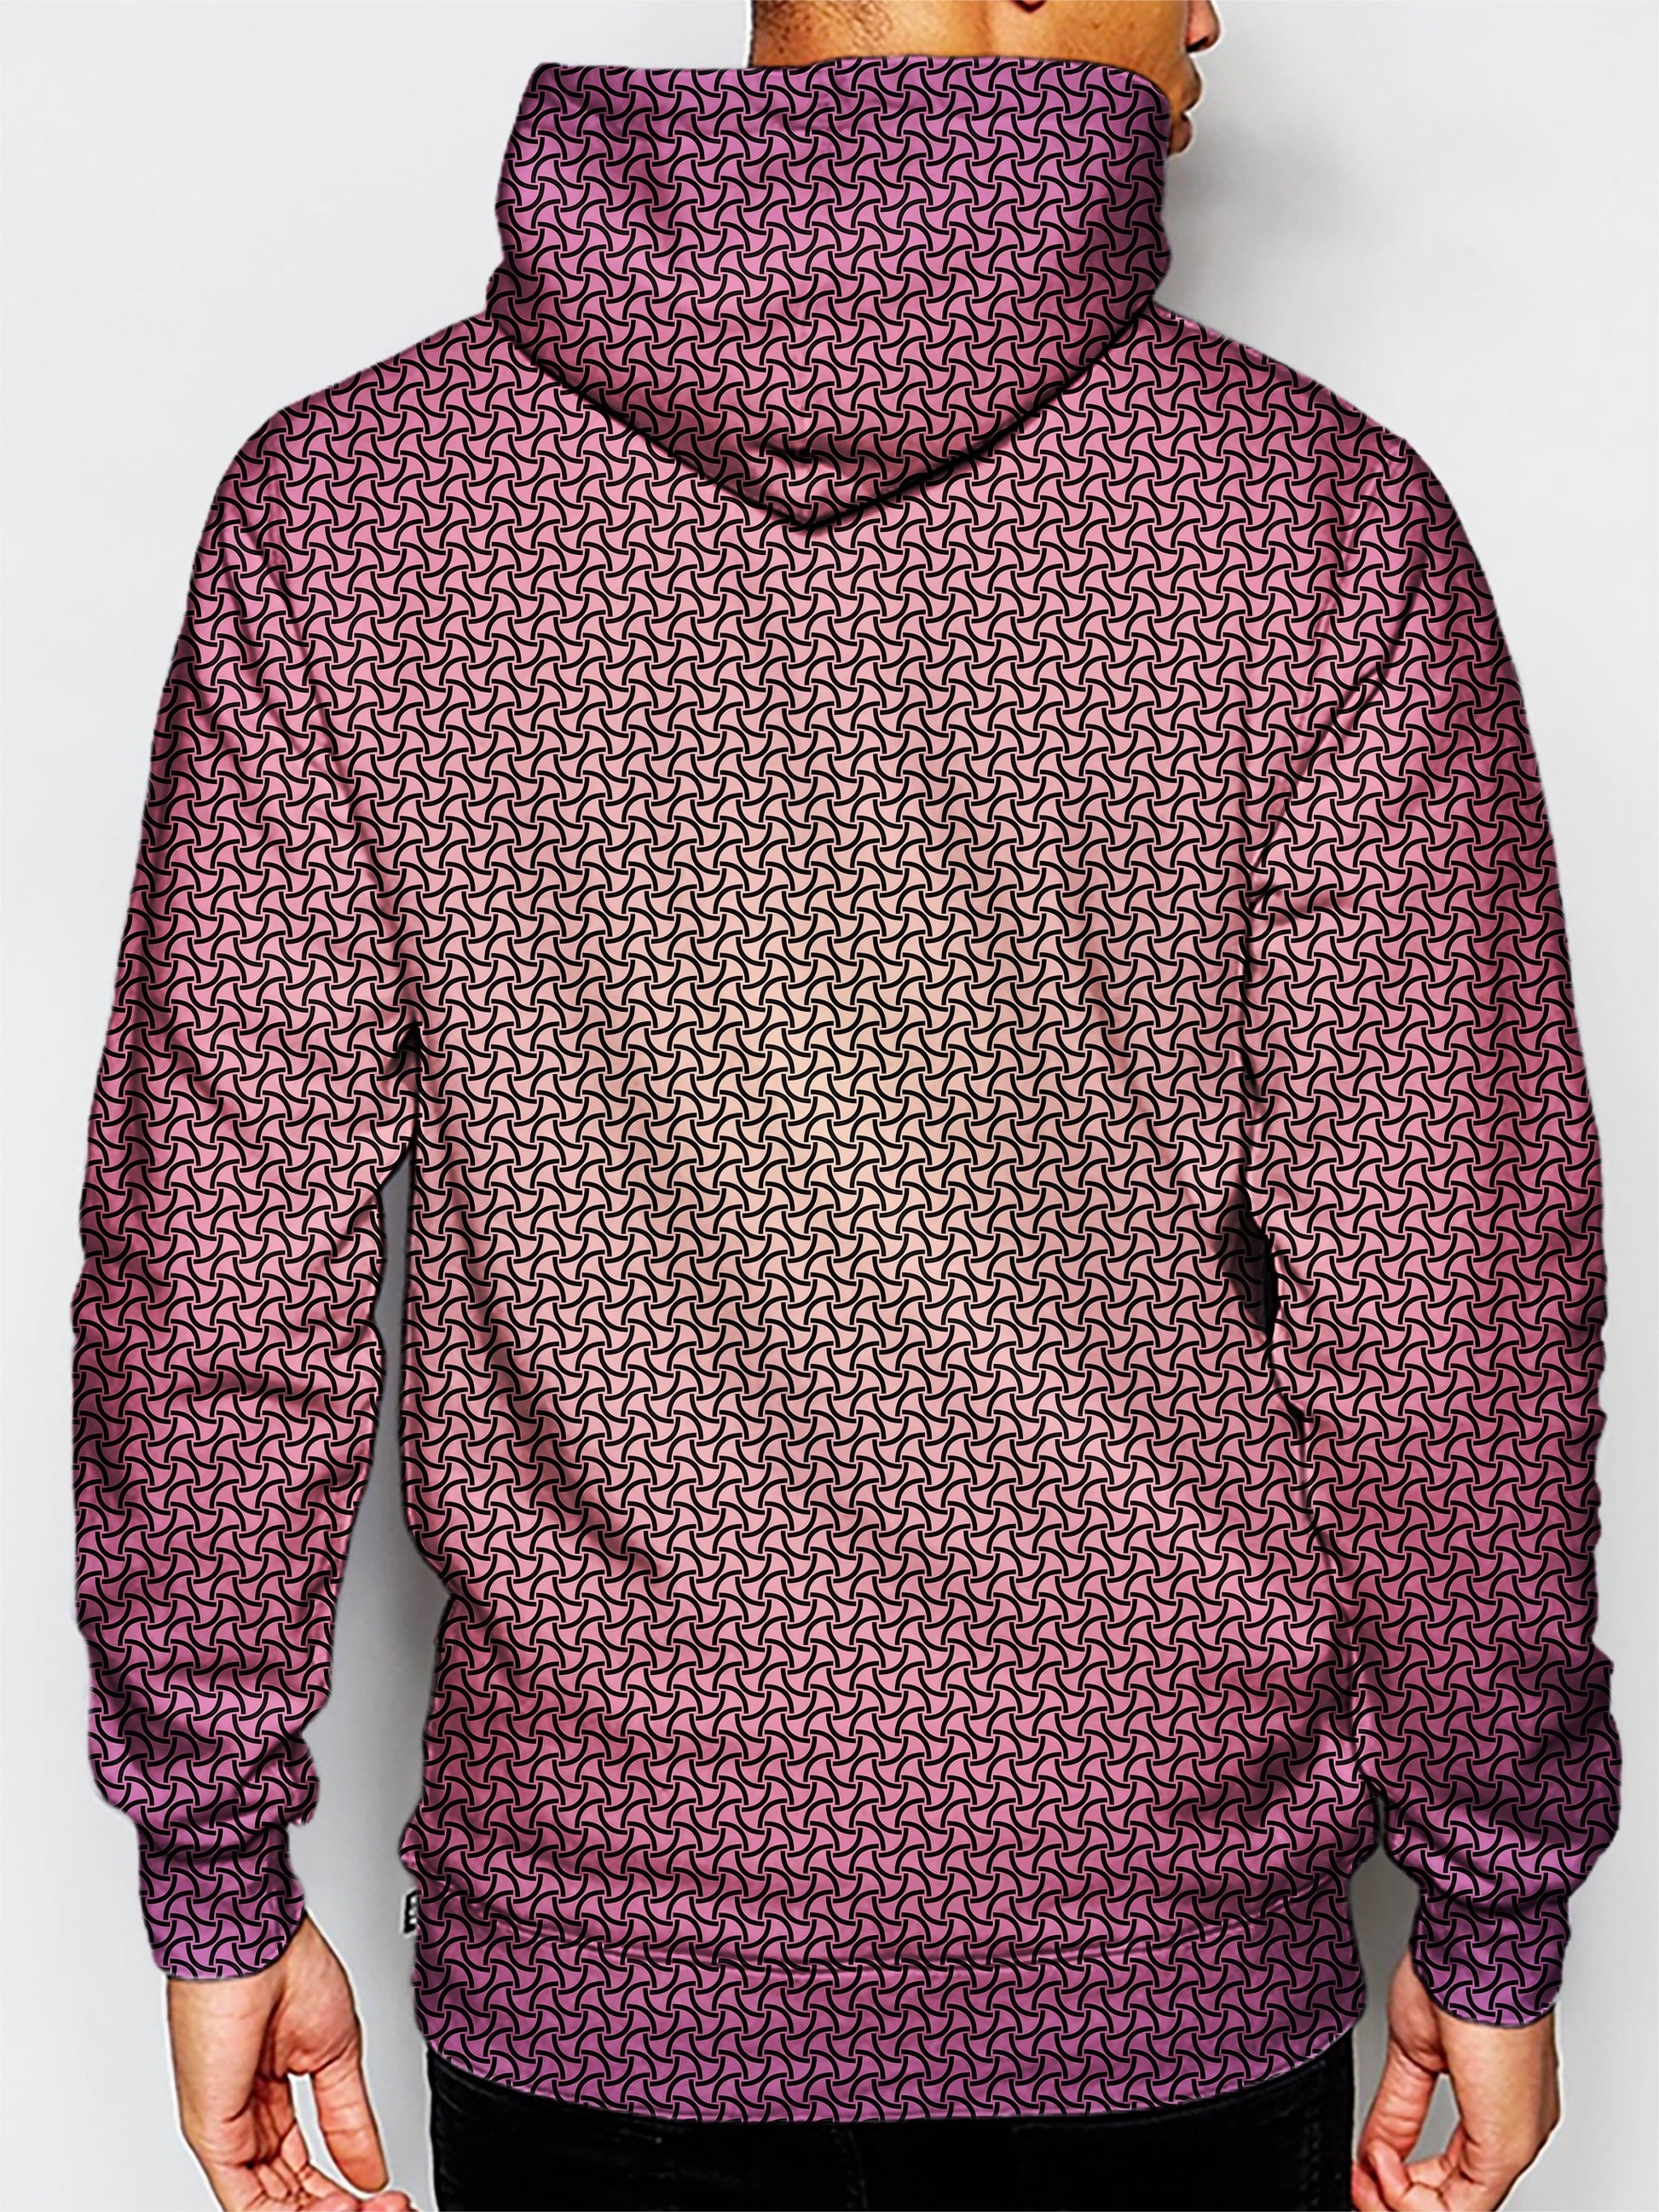 mens music festival hoodie - purple and yellow fade pattern